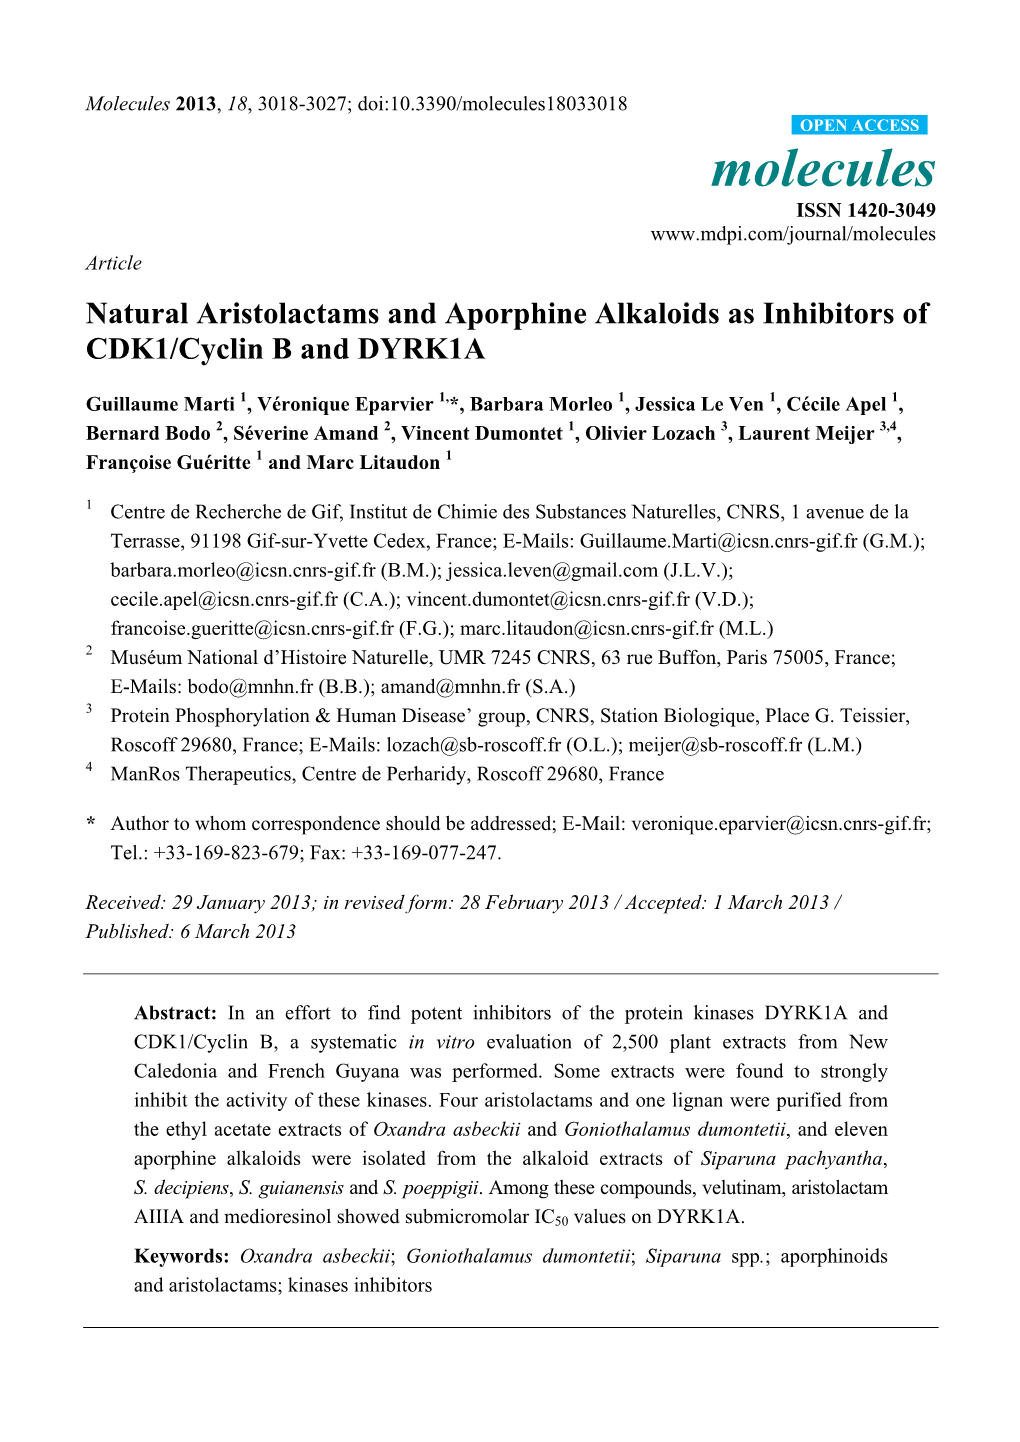 Natural Aristolactams and Aporphine Alkaloids As Inhibitors of CDK1/Cyclin B and DYRK1A